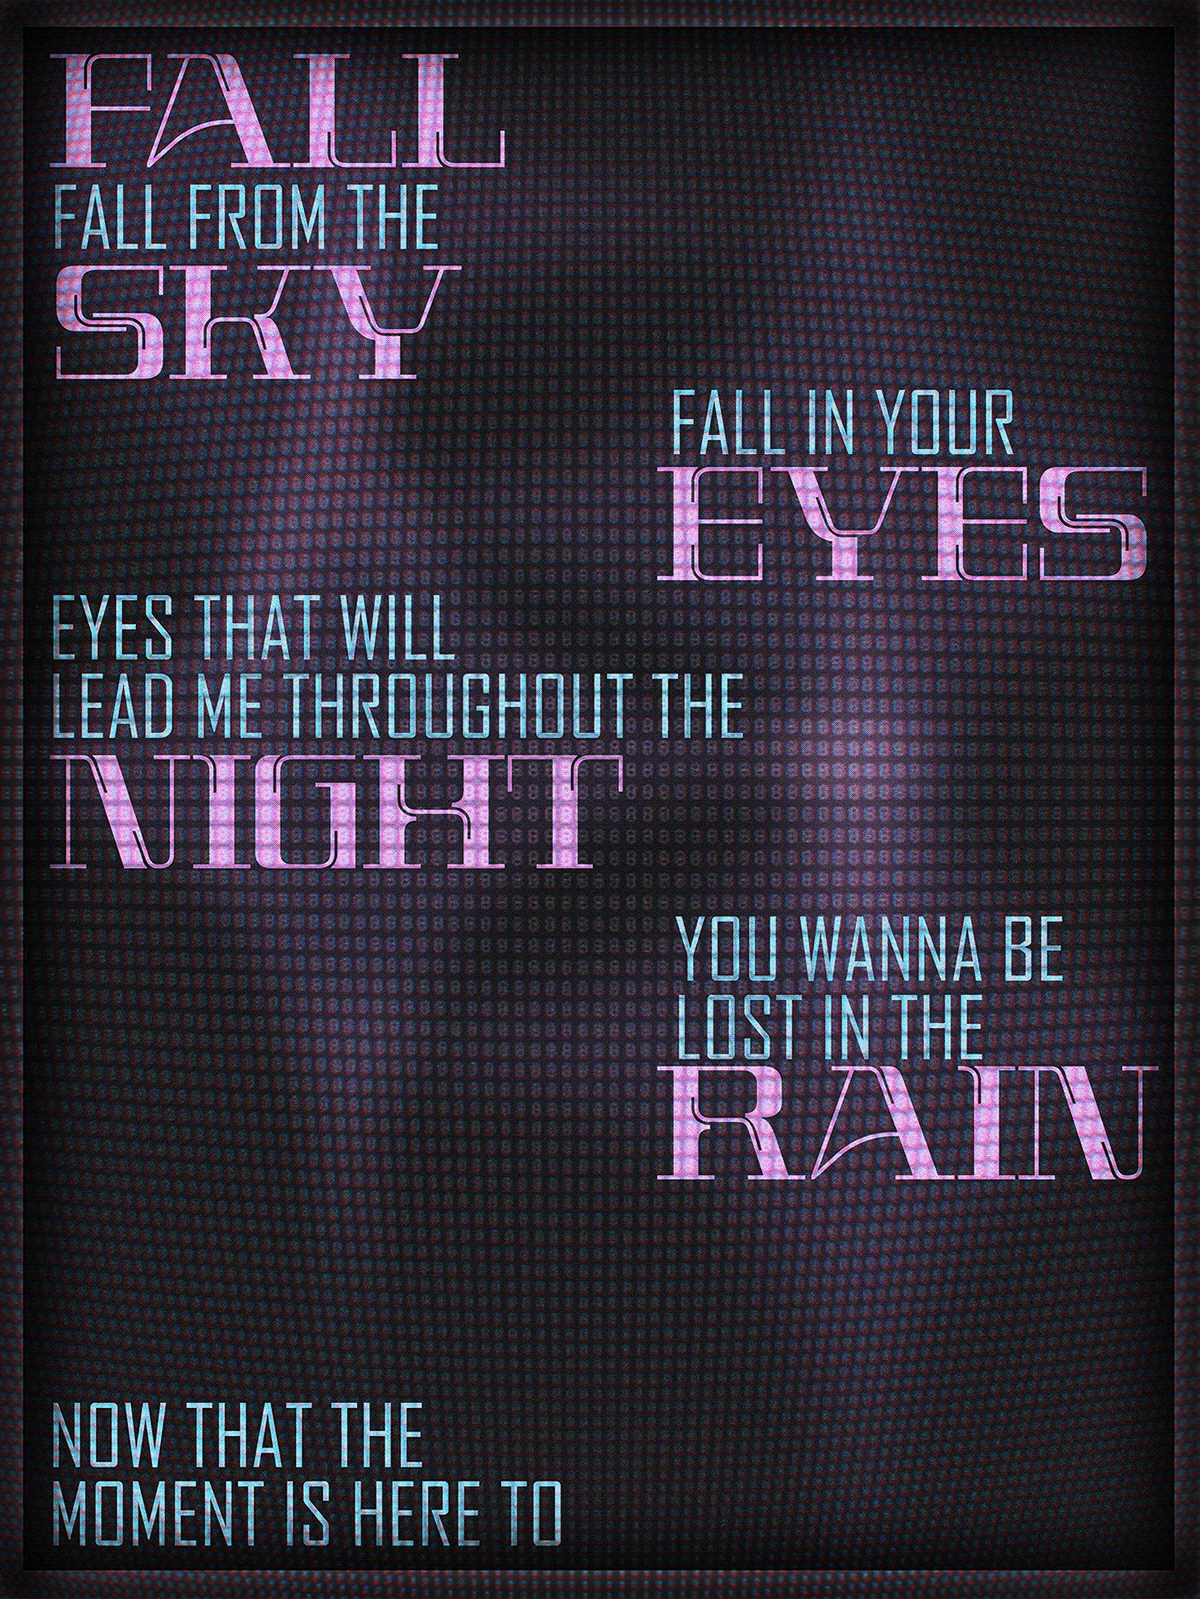 Inspired by the track "FALL FROM THE SKY" by RomancePlanet.